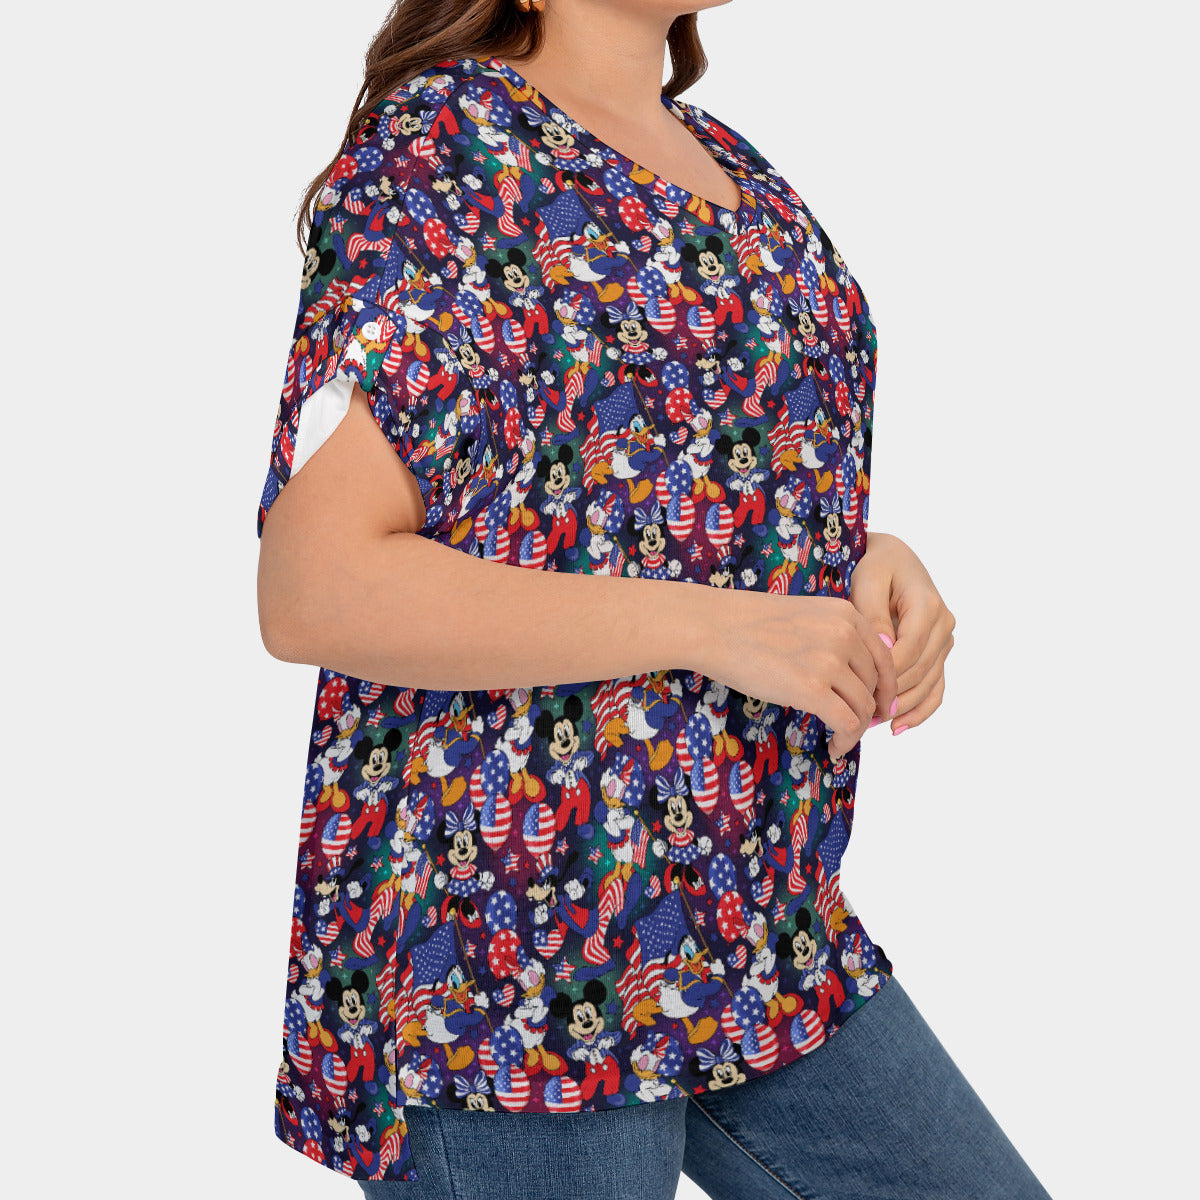 America Women's Plus Size Short Sleeve T-shirt With Sleeve Loops